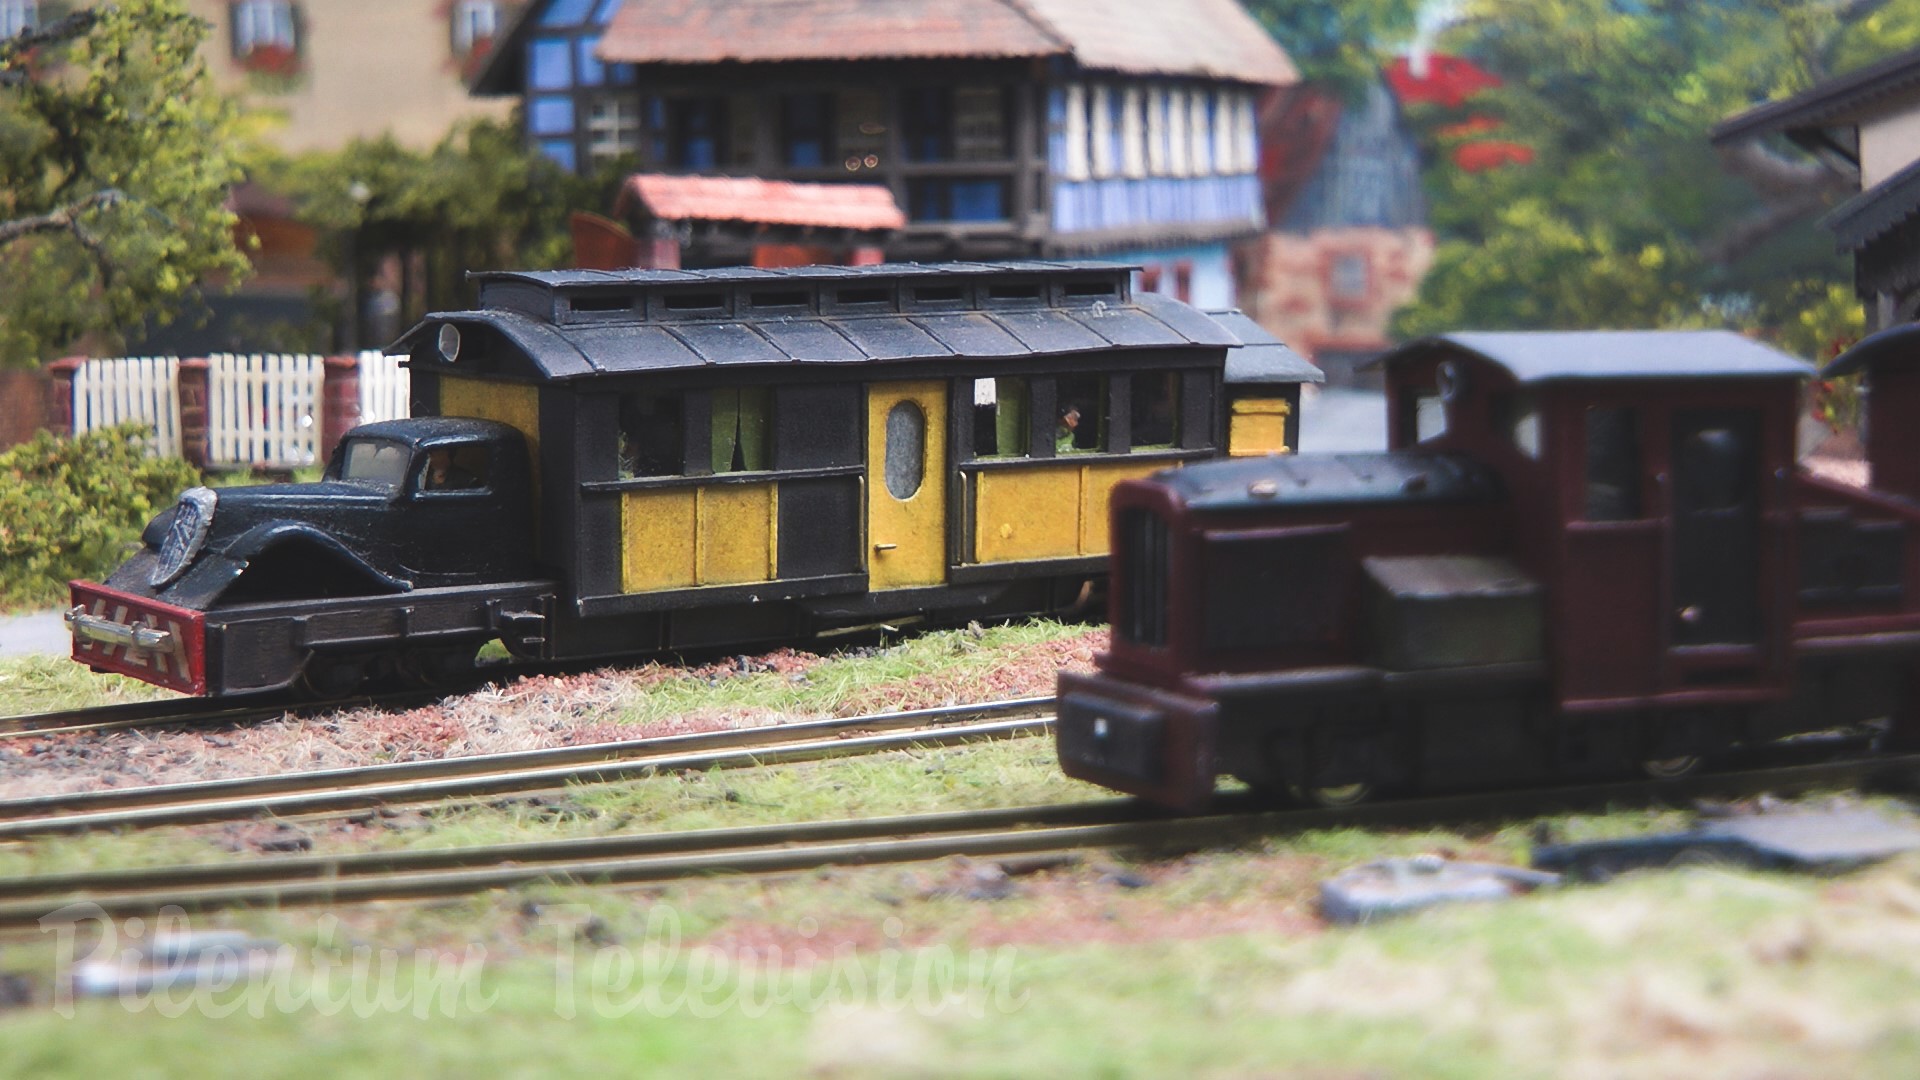 Rubber-Tired Trains on a French Field Railway Layout - Rail Bus and Rail Lorry (Model Railroading)